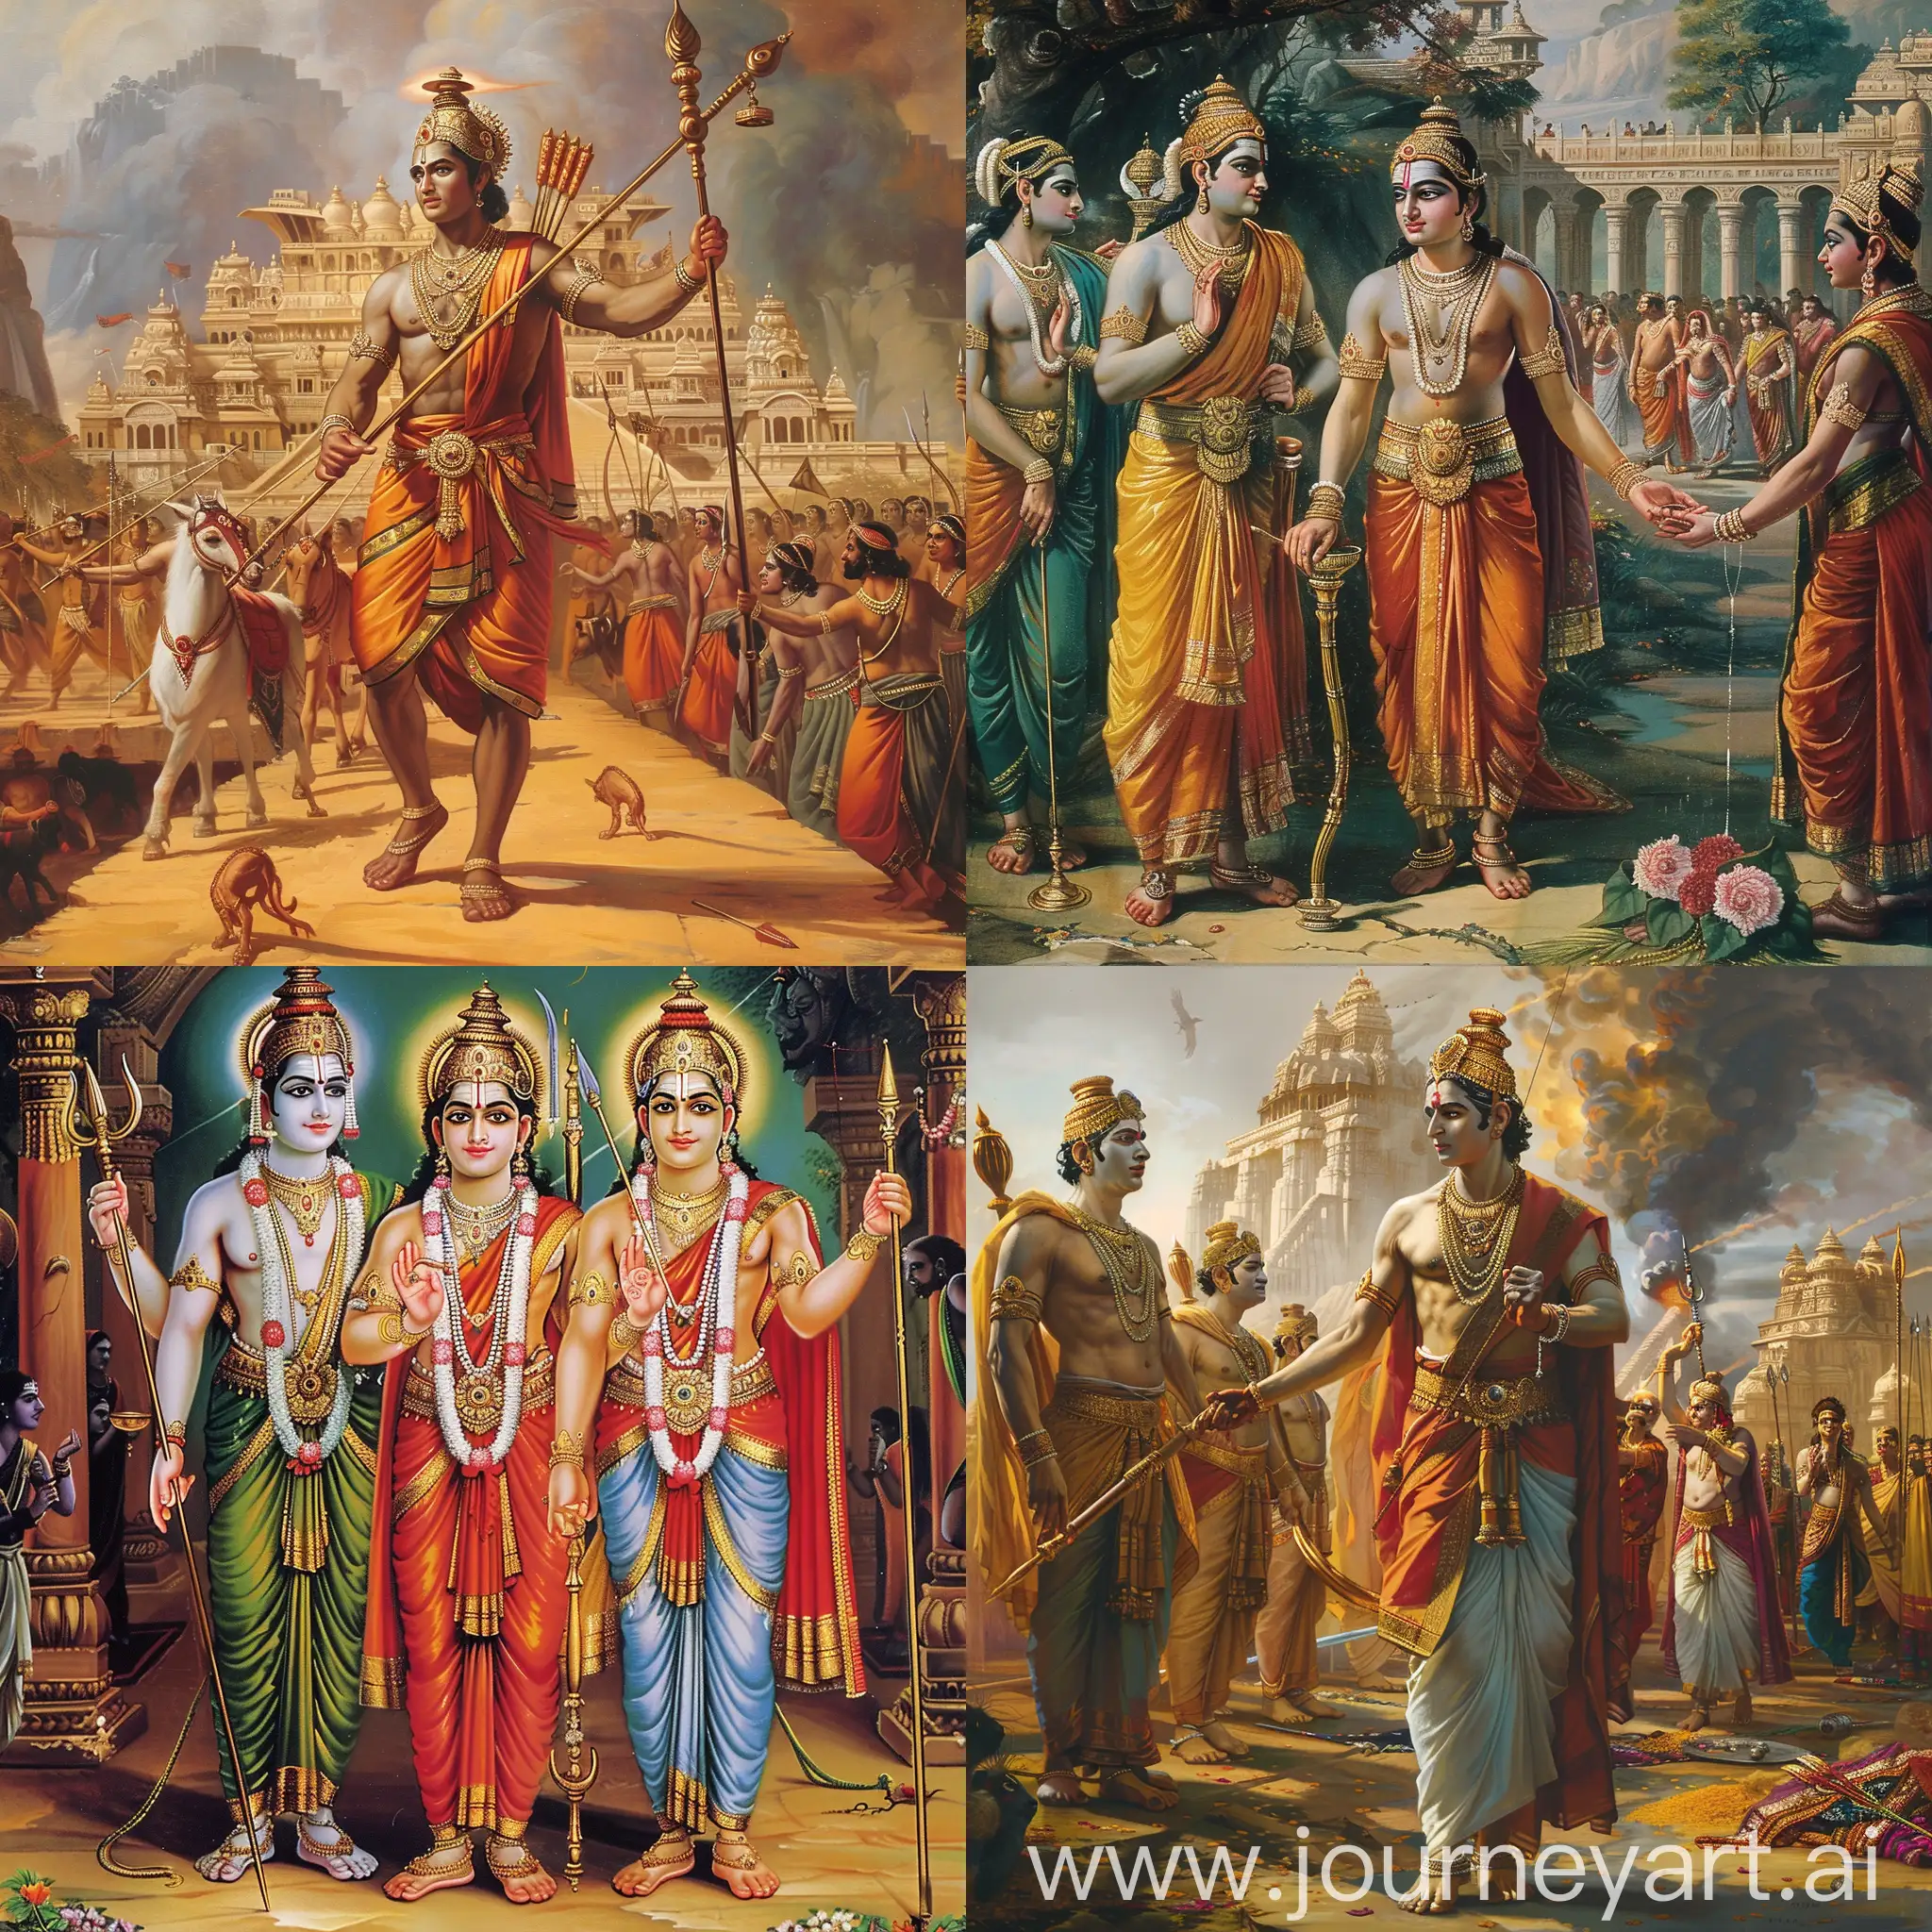 TELL RAMAYANA IN 5 IMAGES